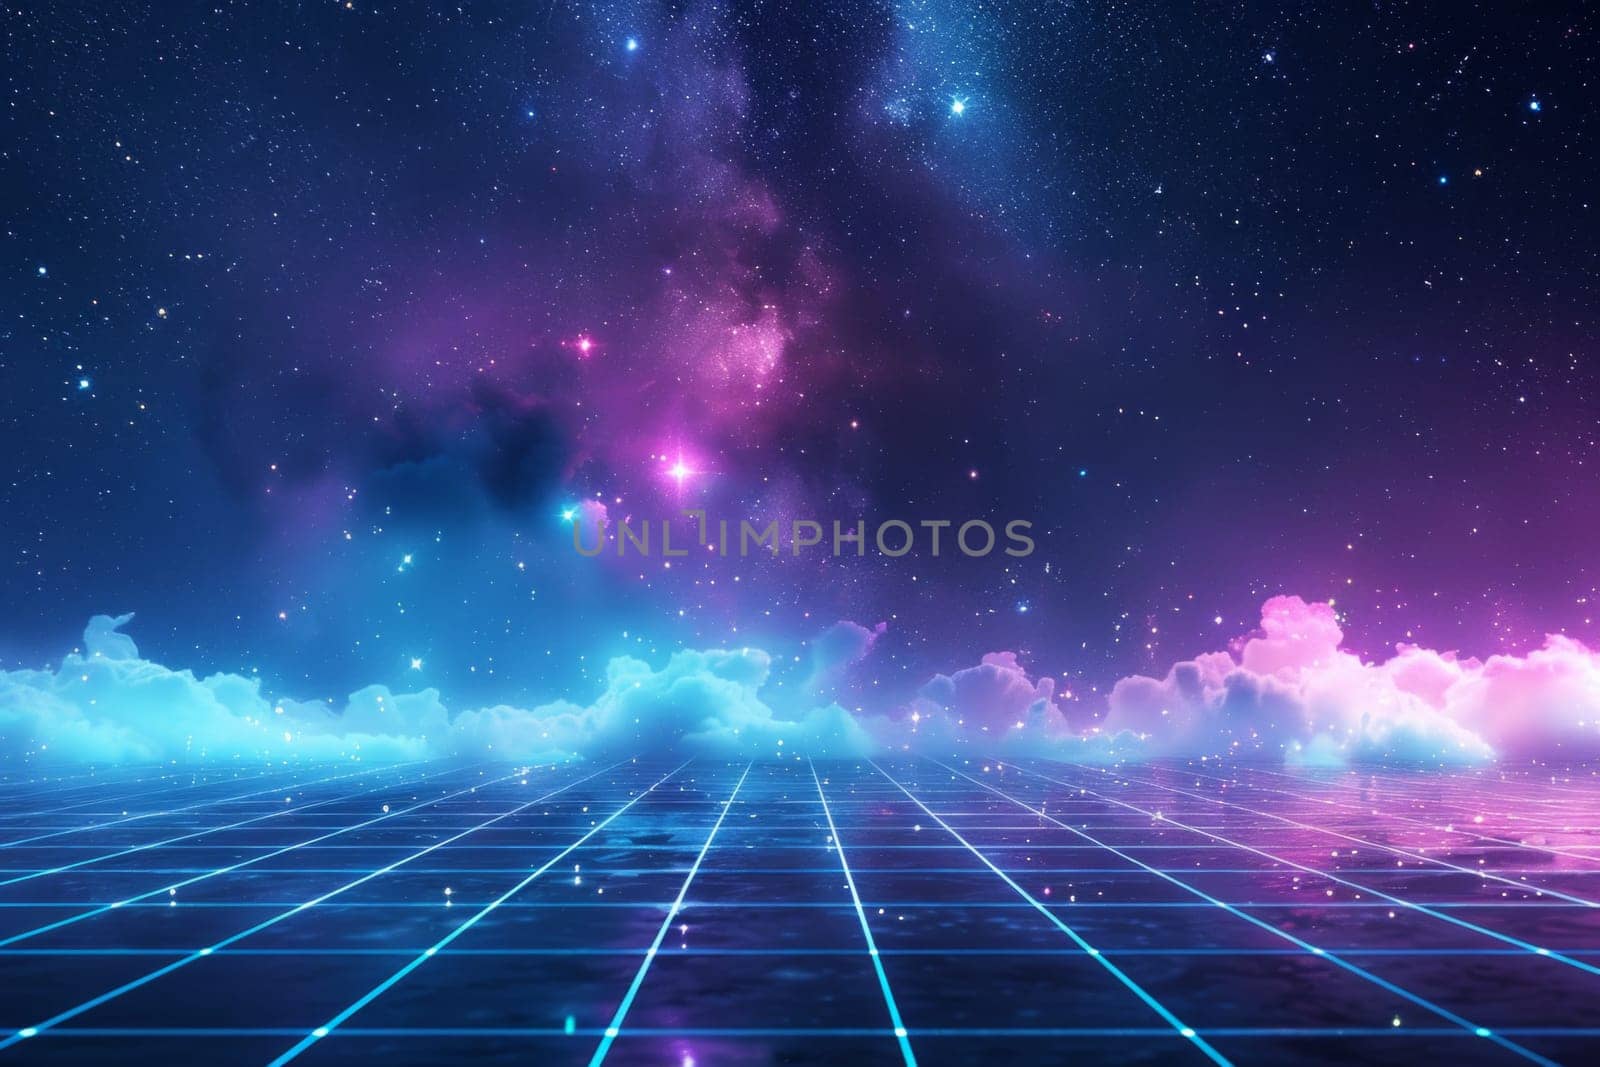 Abstract empty futuristic blue and purple background with a light grid floor and stars in the dark in the background.